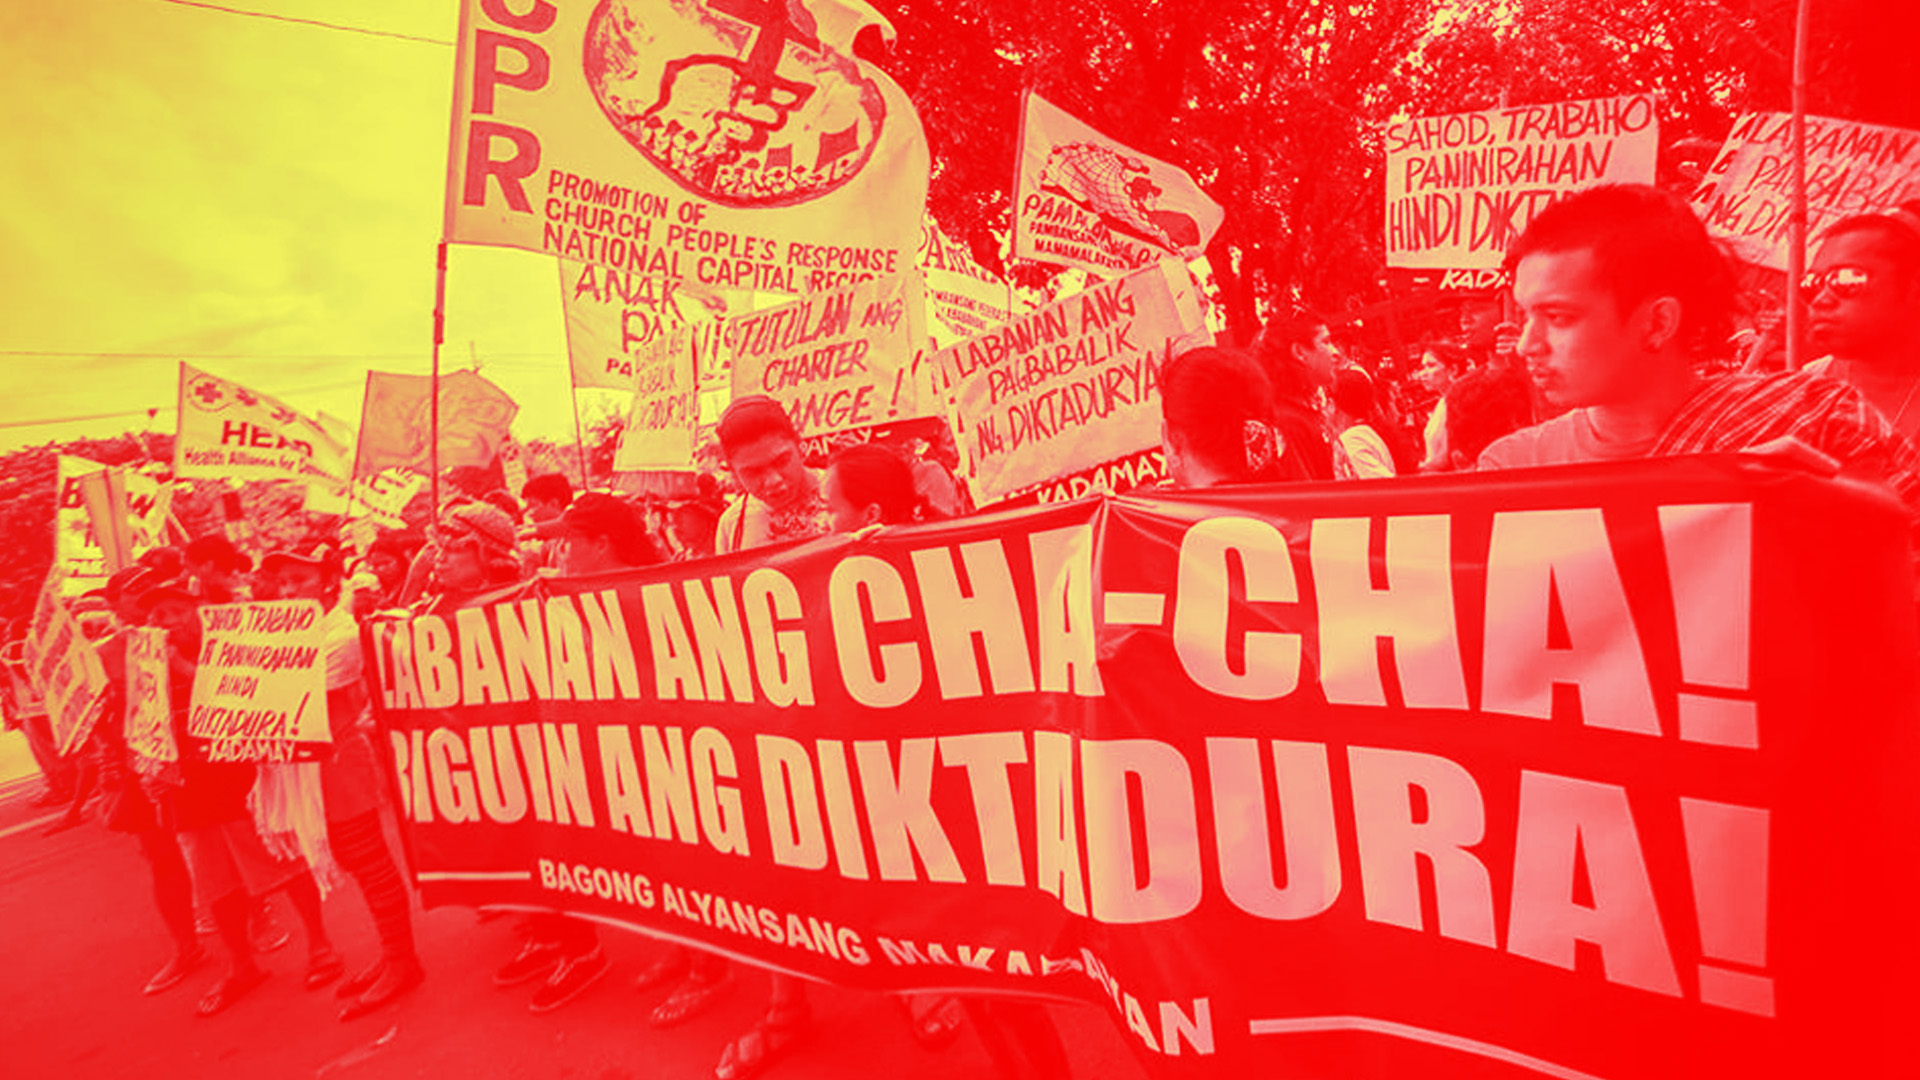 Protestors oppose charter change in the Philippines.